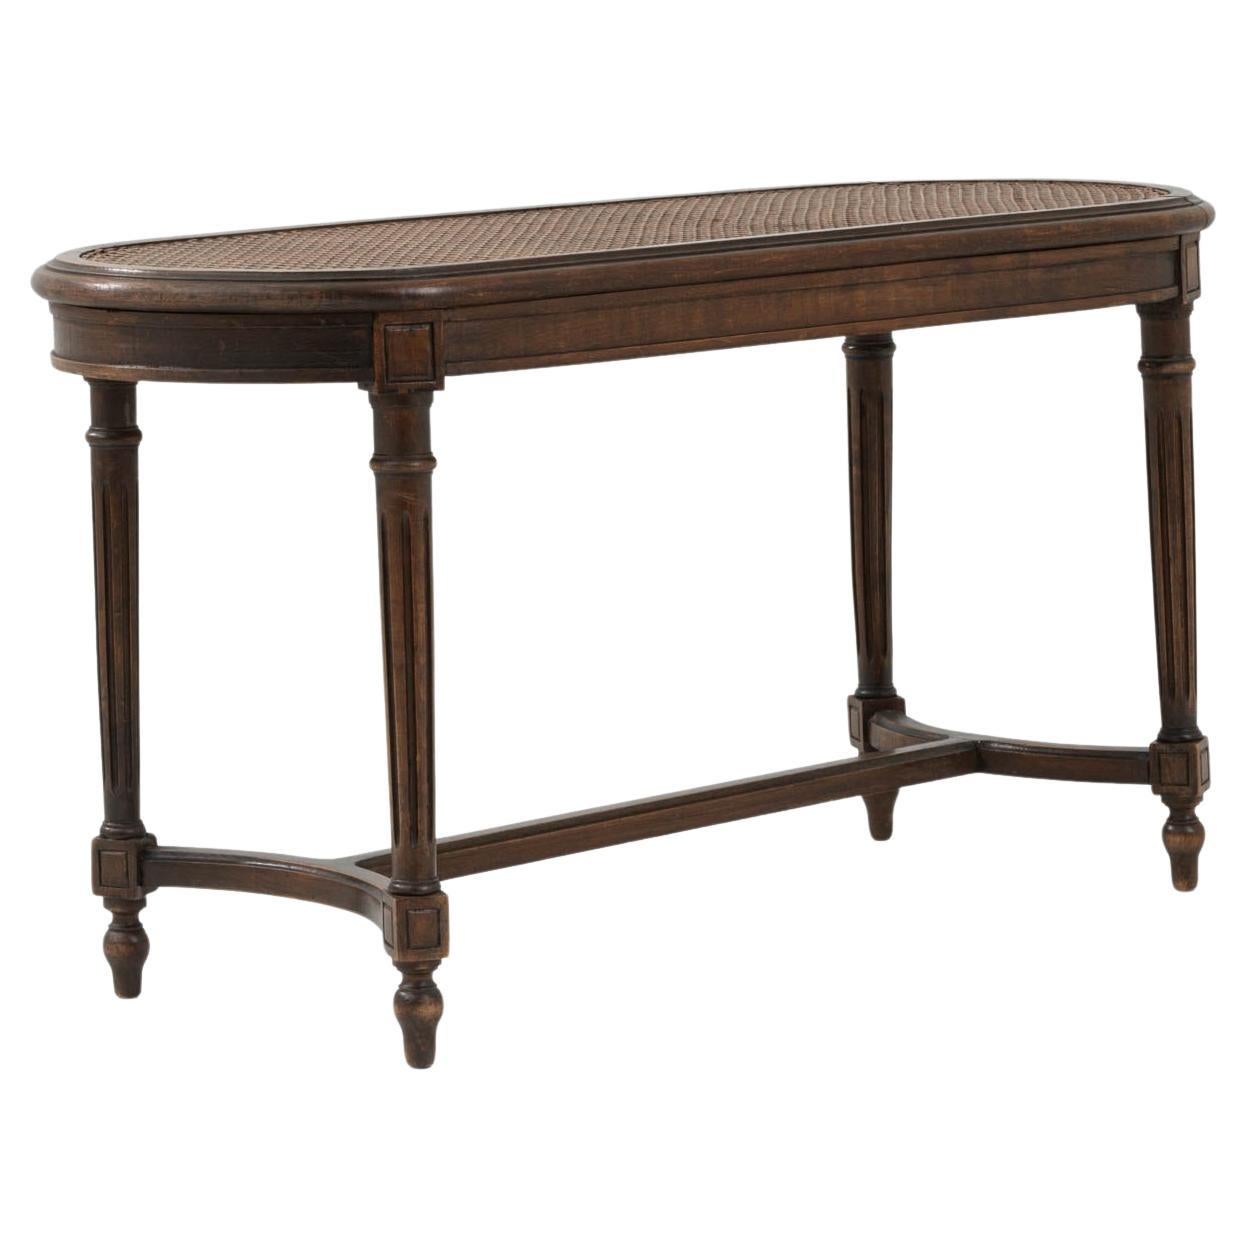 Early 20th Century French Wooden Bench